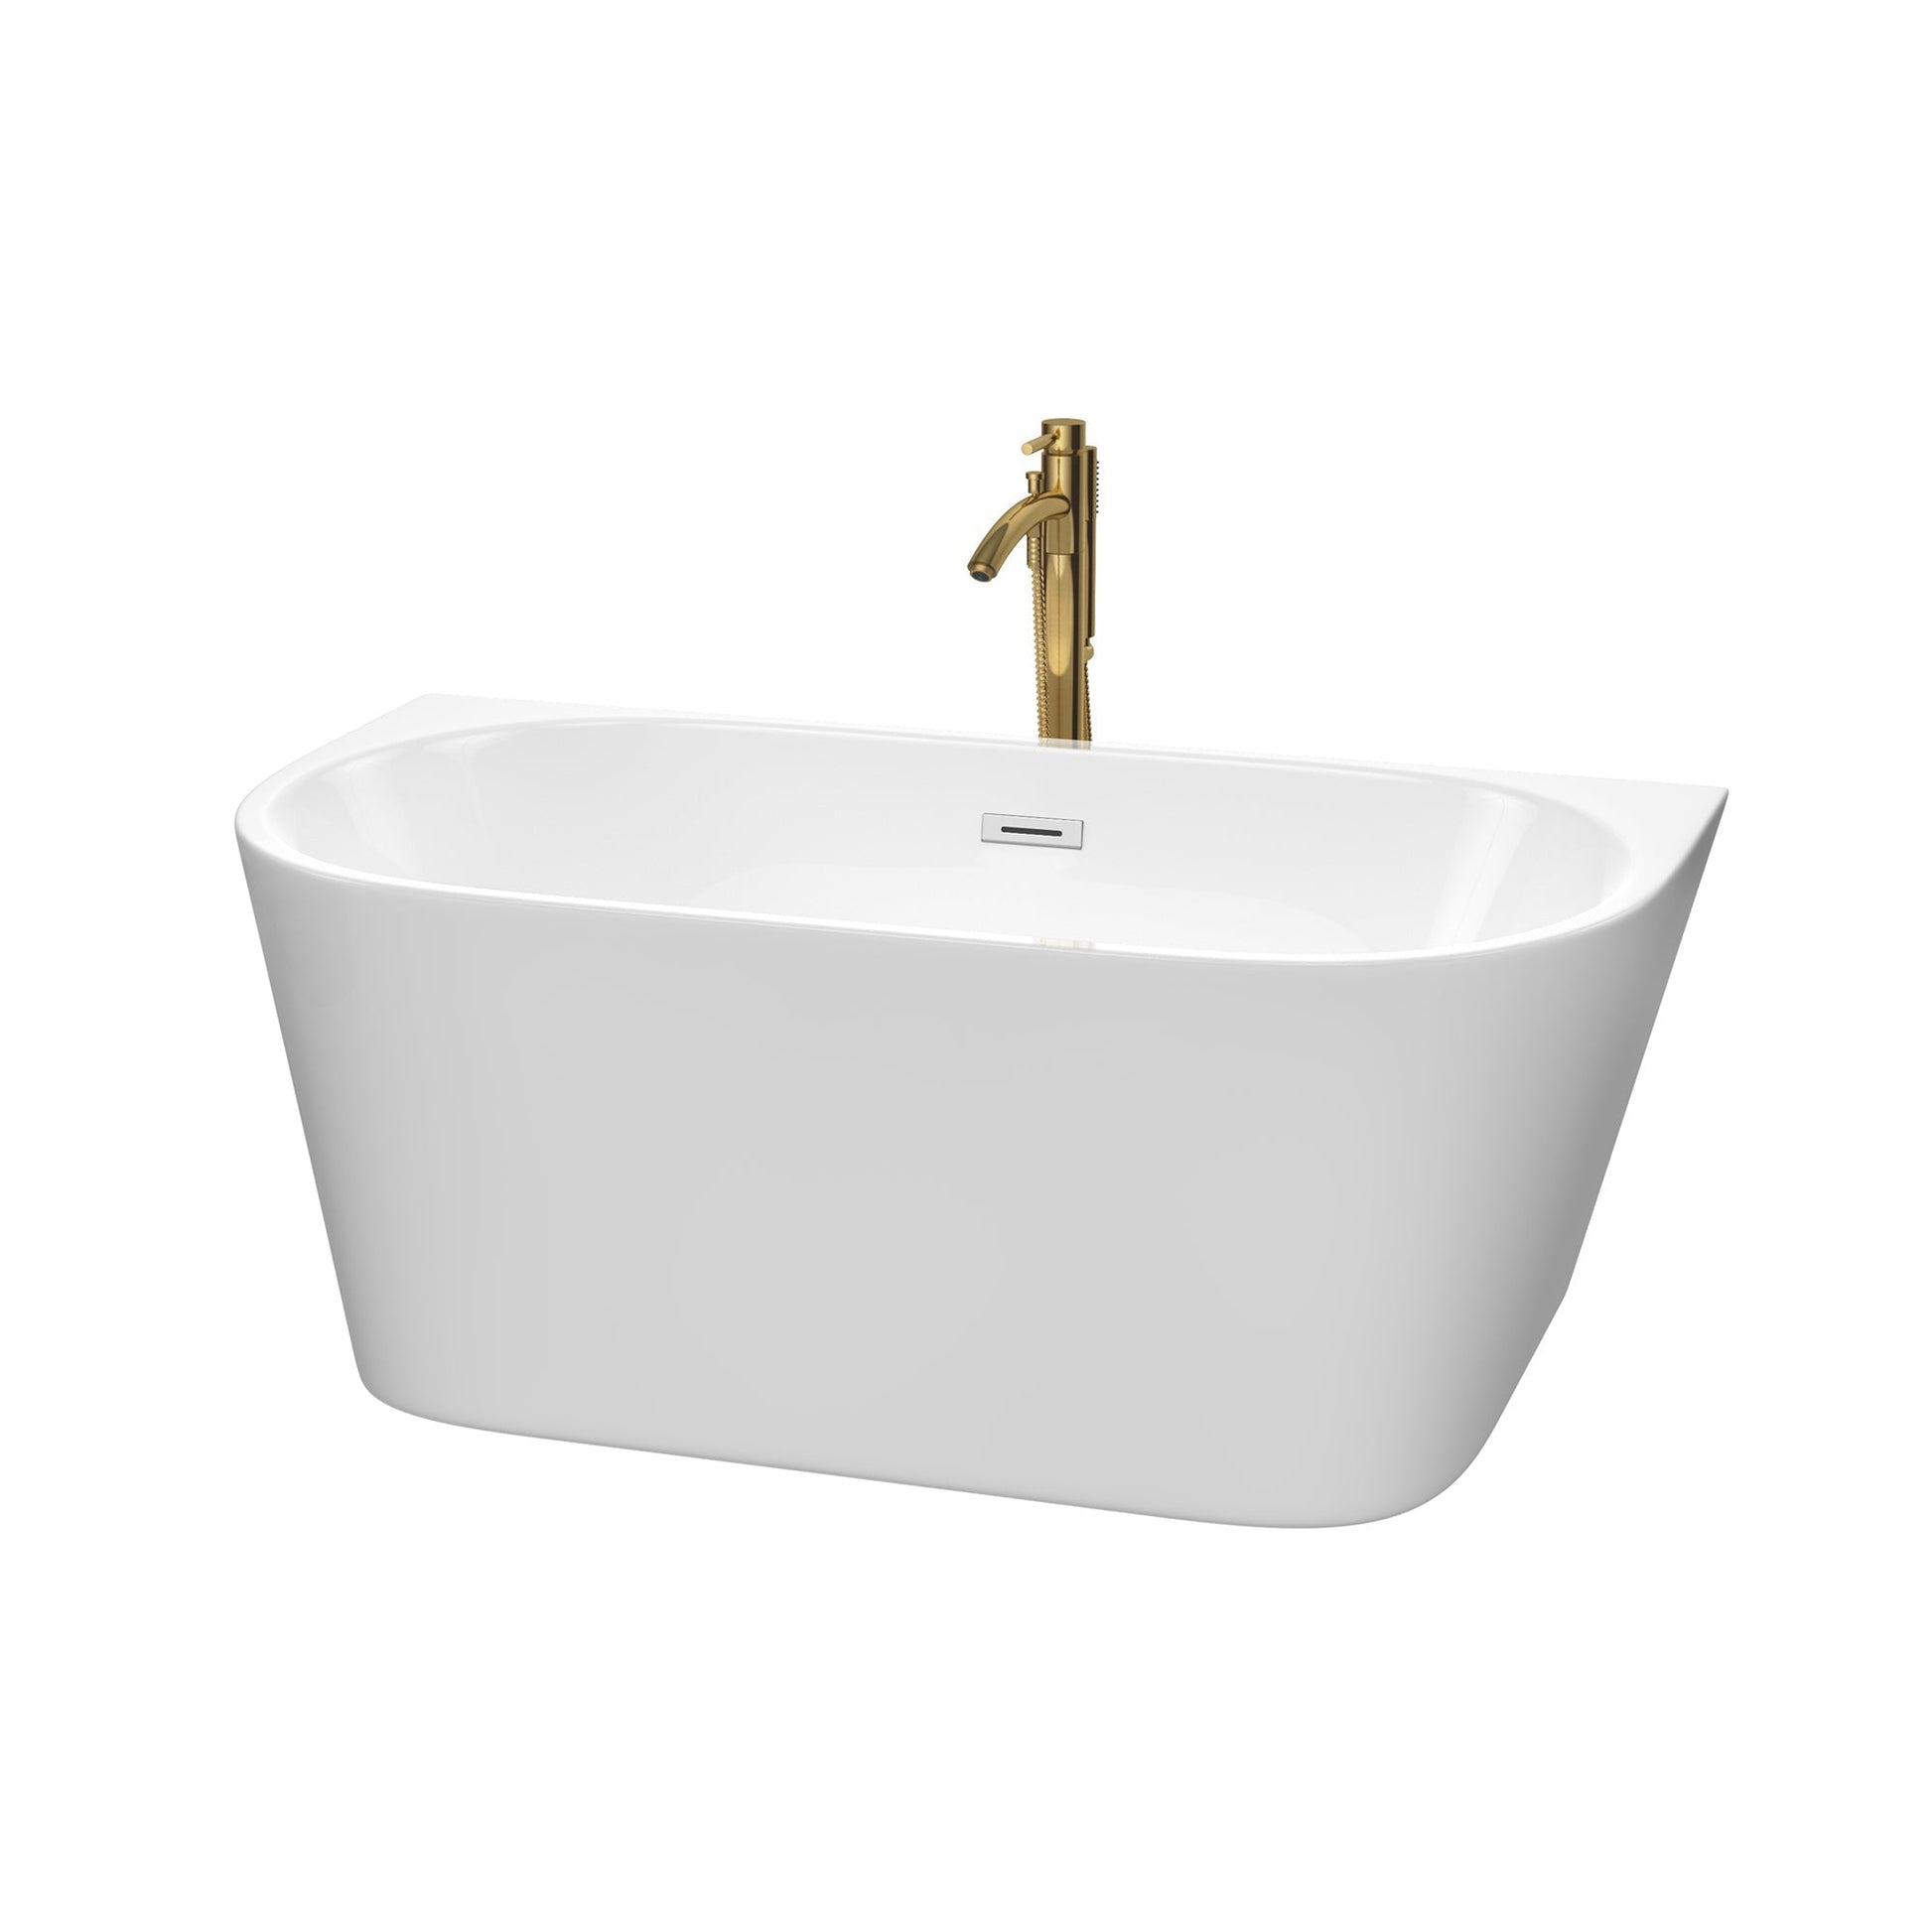 Wyndham Collection Callie 59" Freestanding Bathtub in White With Polished Chrome Trim and Floor Mounted Faucet in Brushed Gold